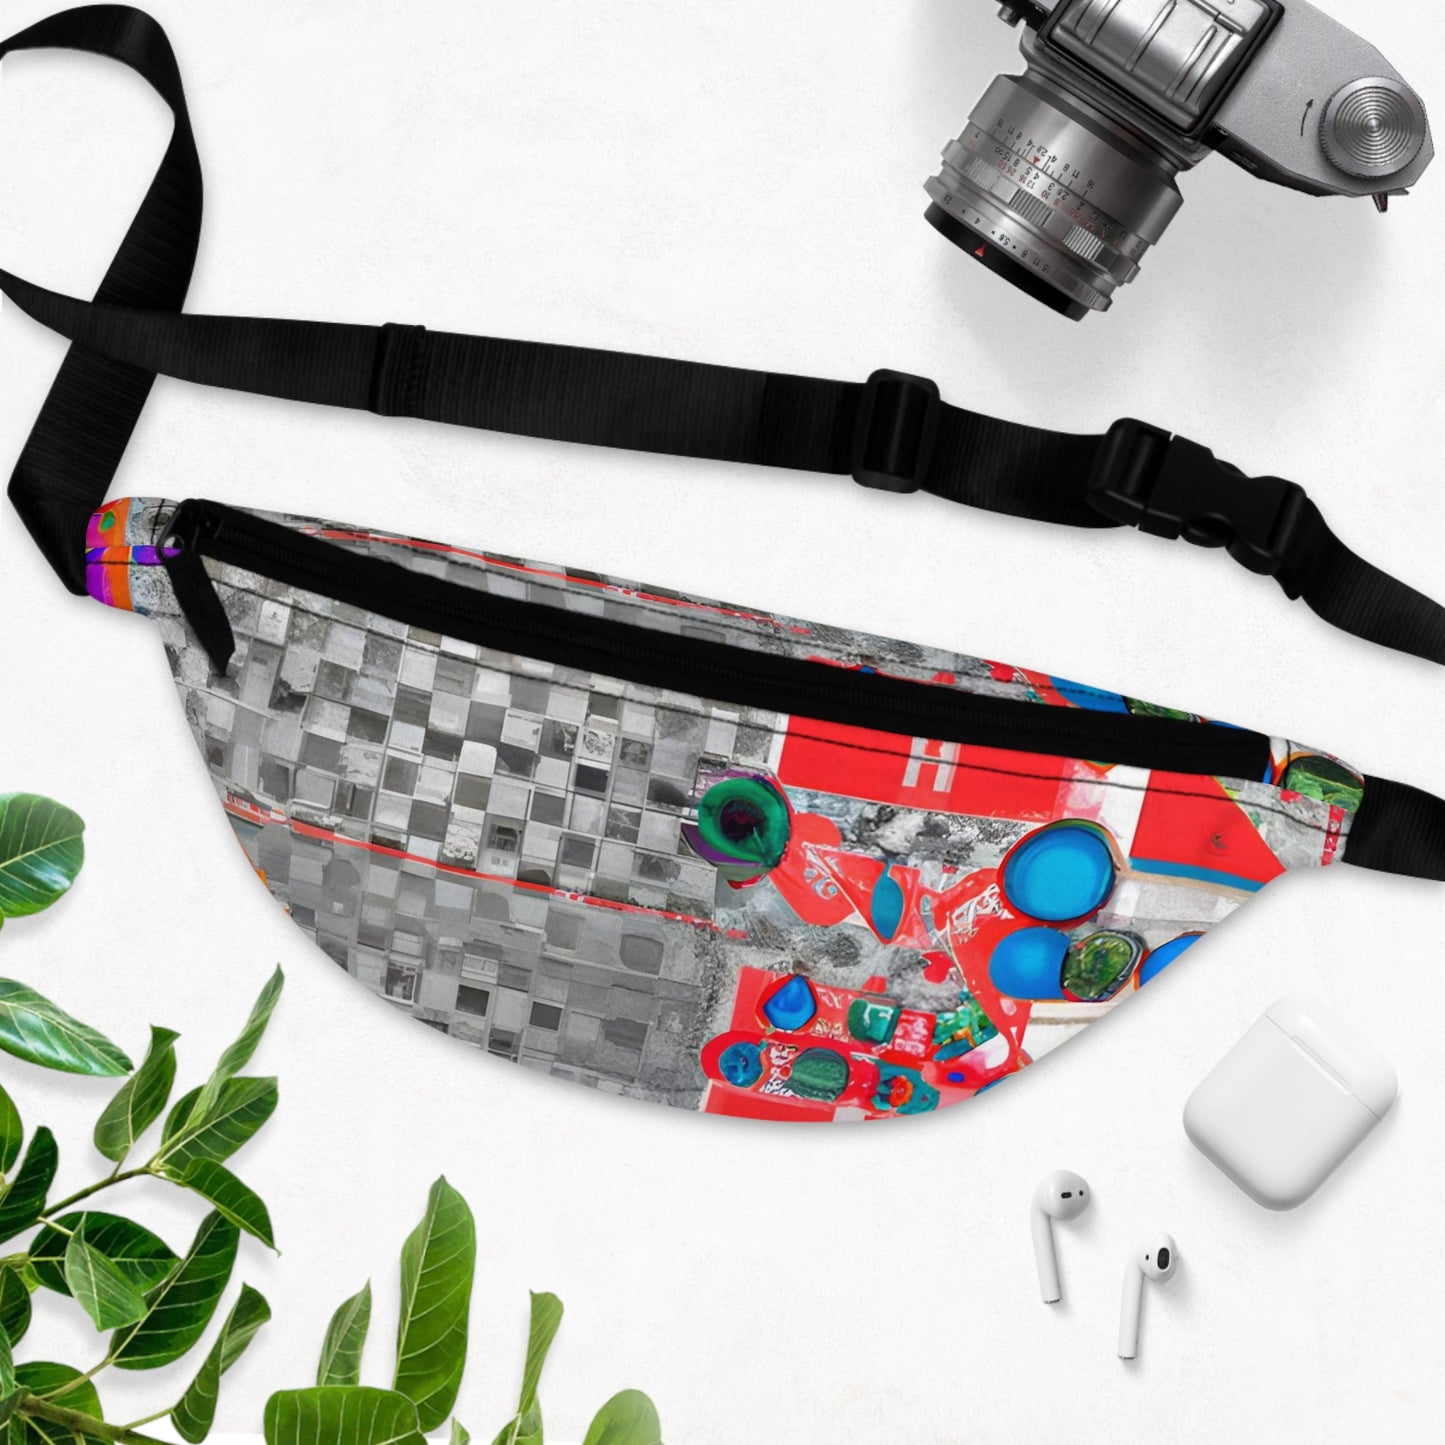 GalaxxyStarz - Gay-Inspired Fanny Pack Belt Bag